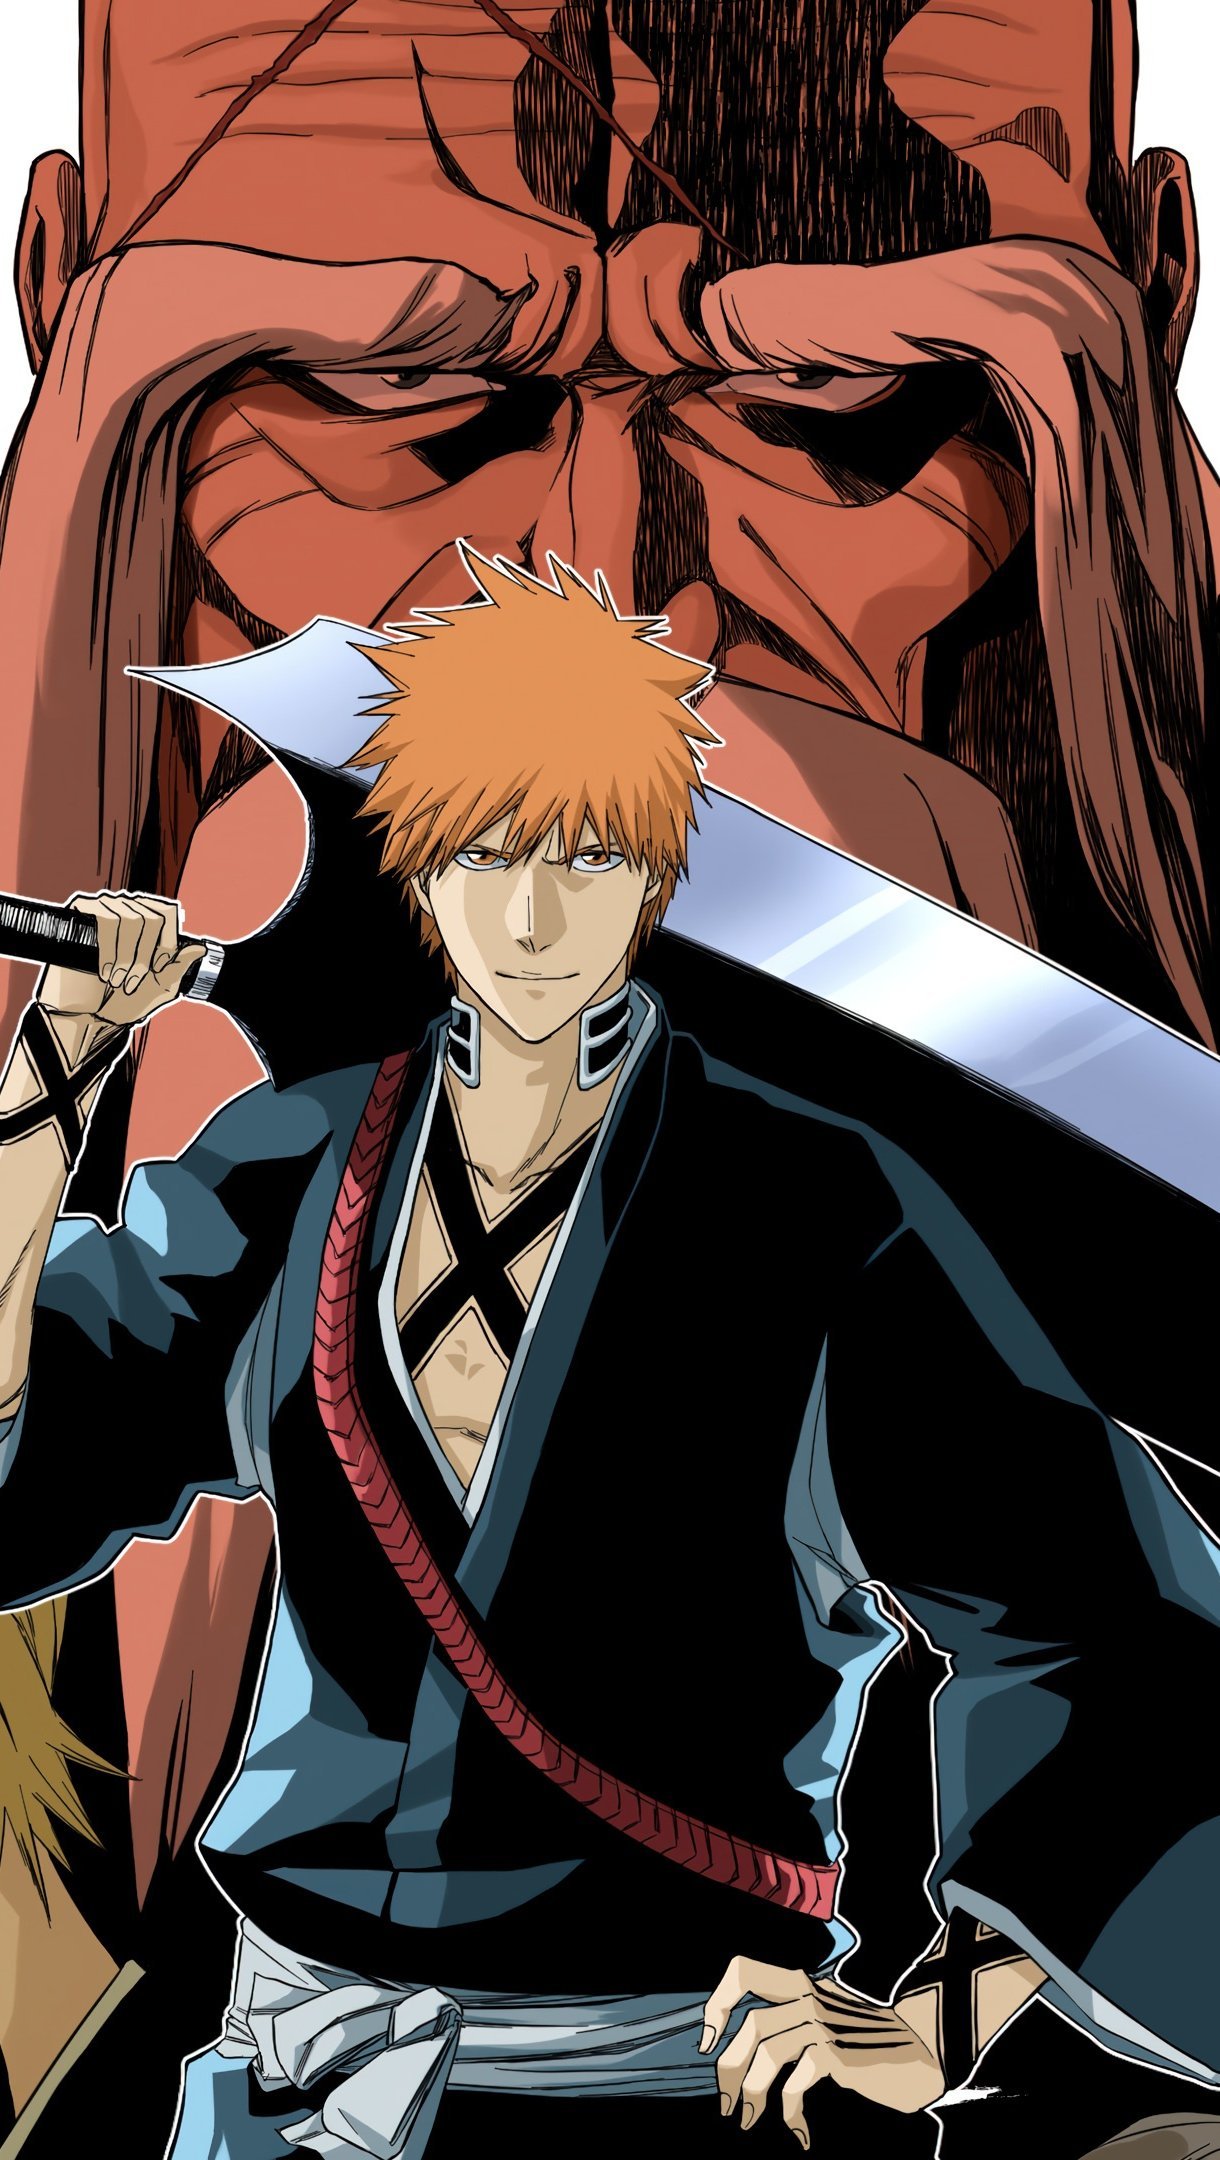 Is Bleach anime completed? - Quora